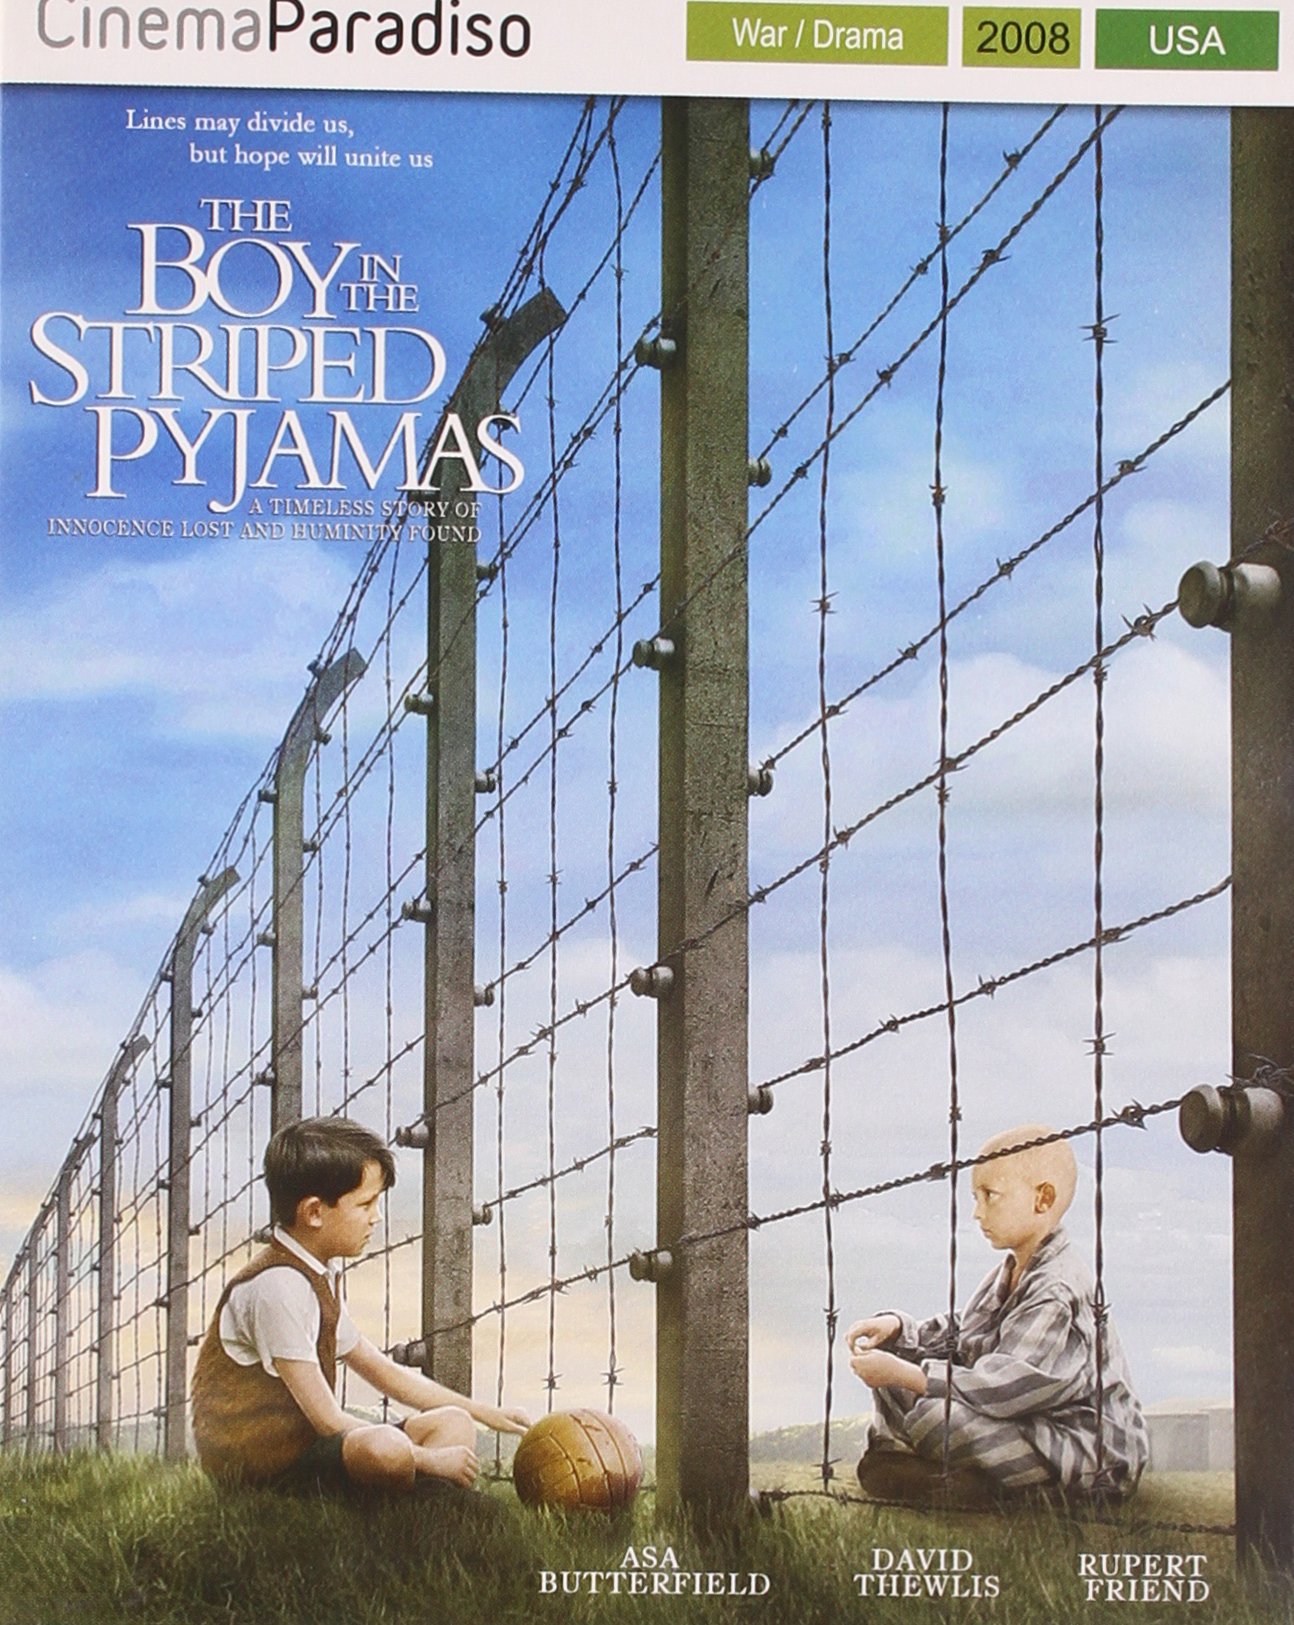 the-boy-in-the-striped-pyjamas-movie-purchase-or-watch-online